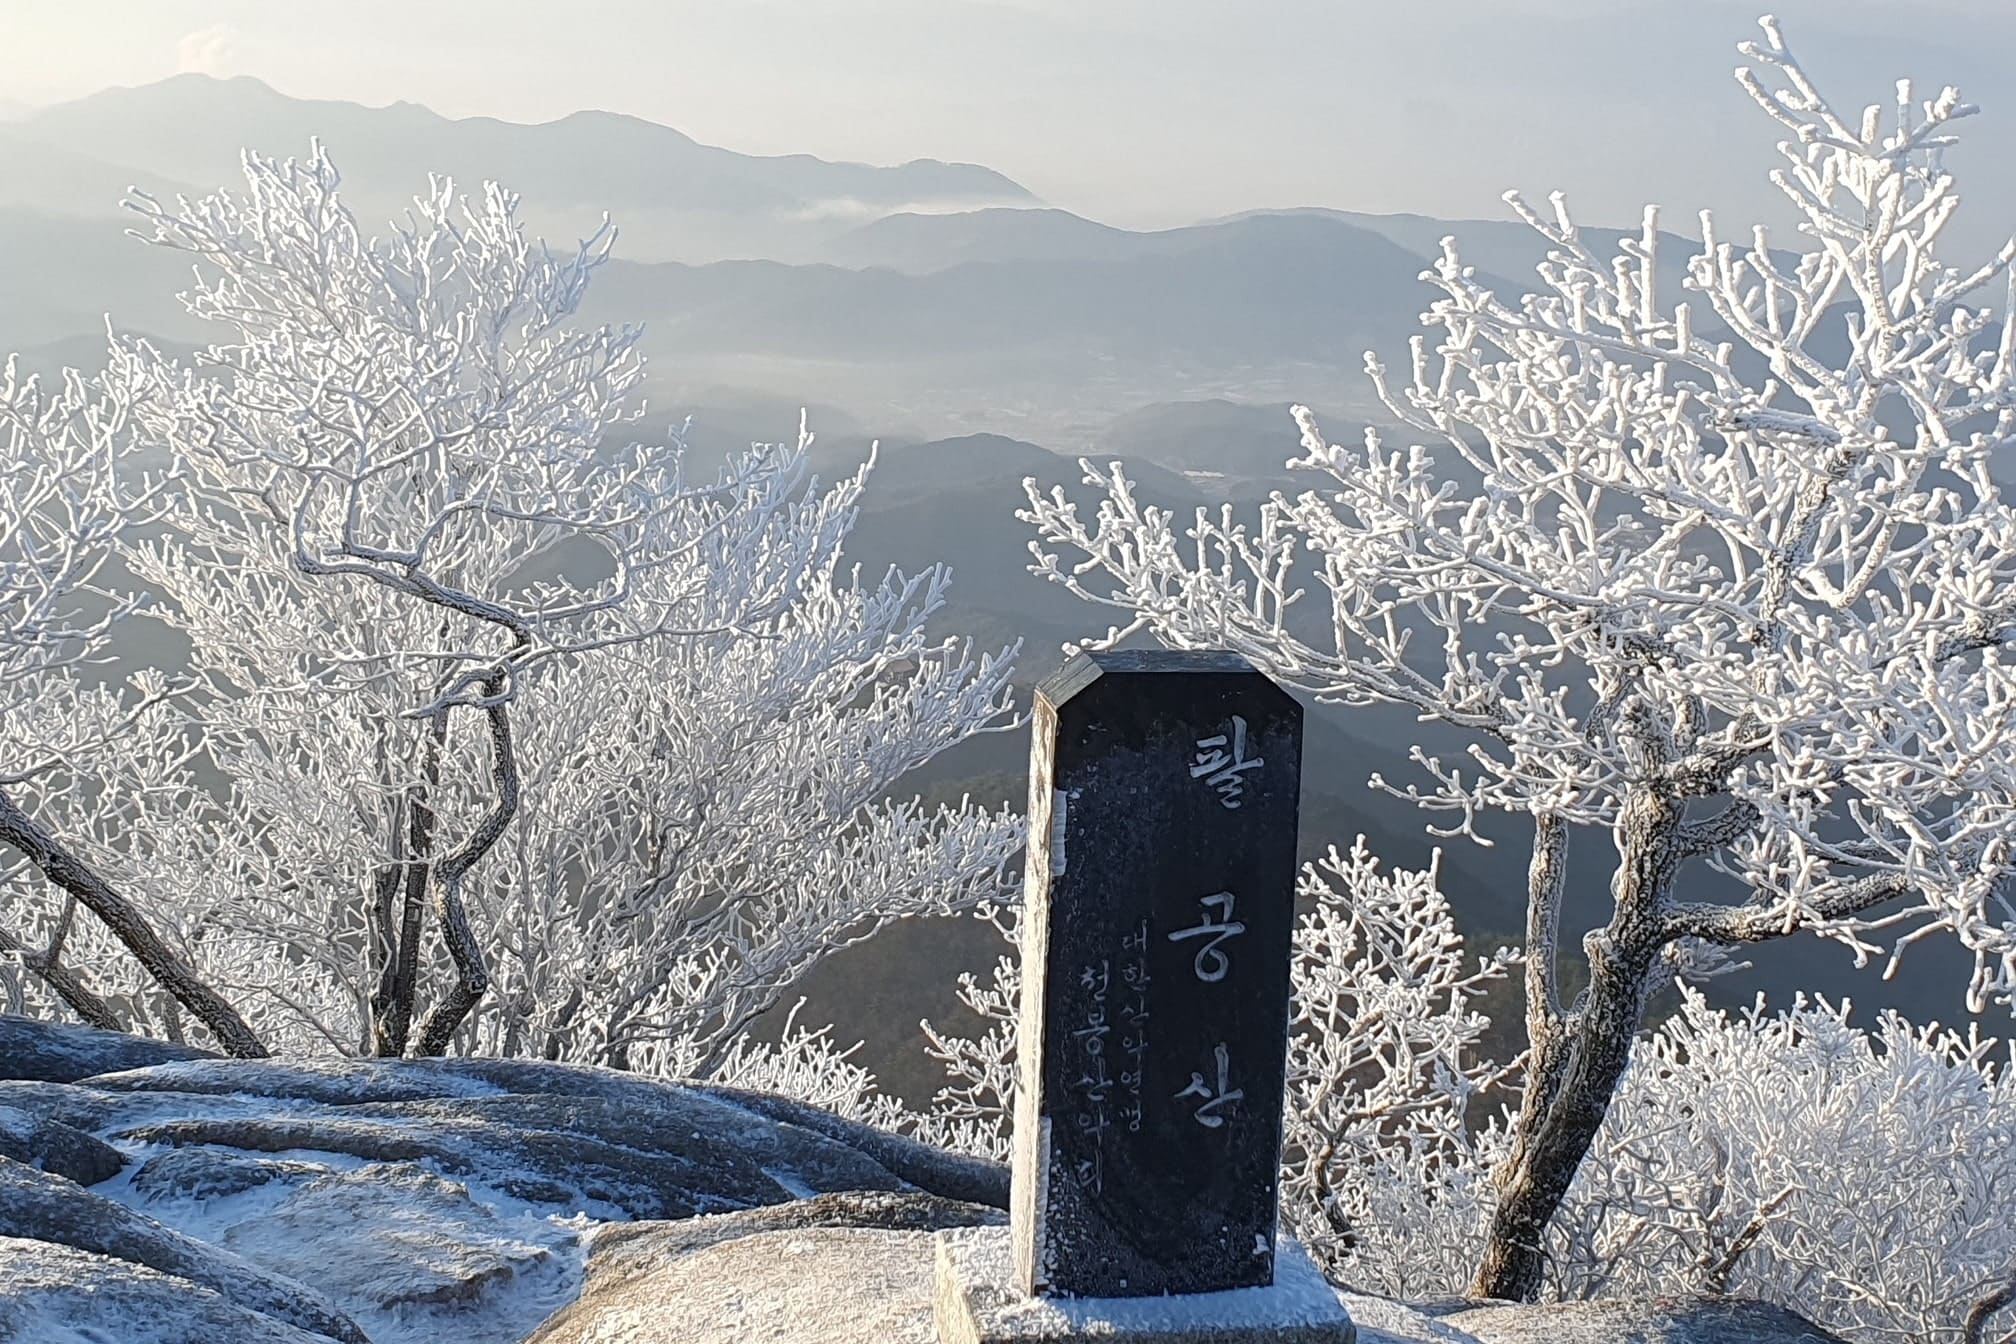 Holiest Mountain in Korean Buddhism Enshrined as South Korea’s 23rd National Park